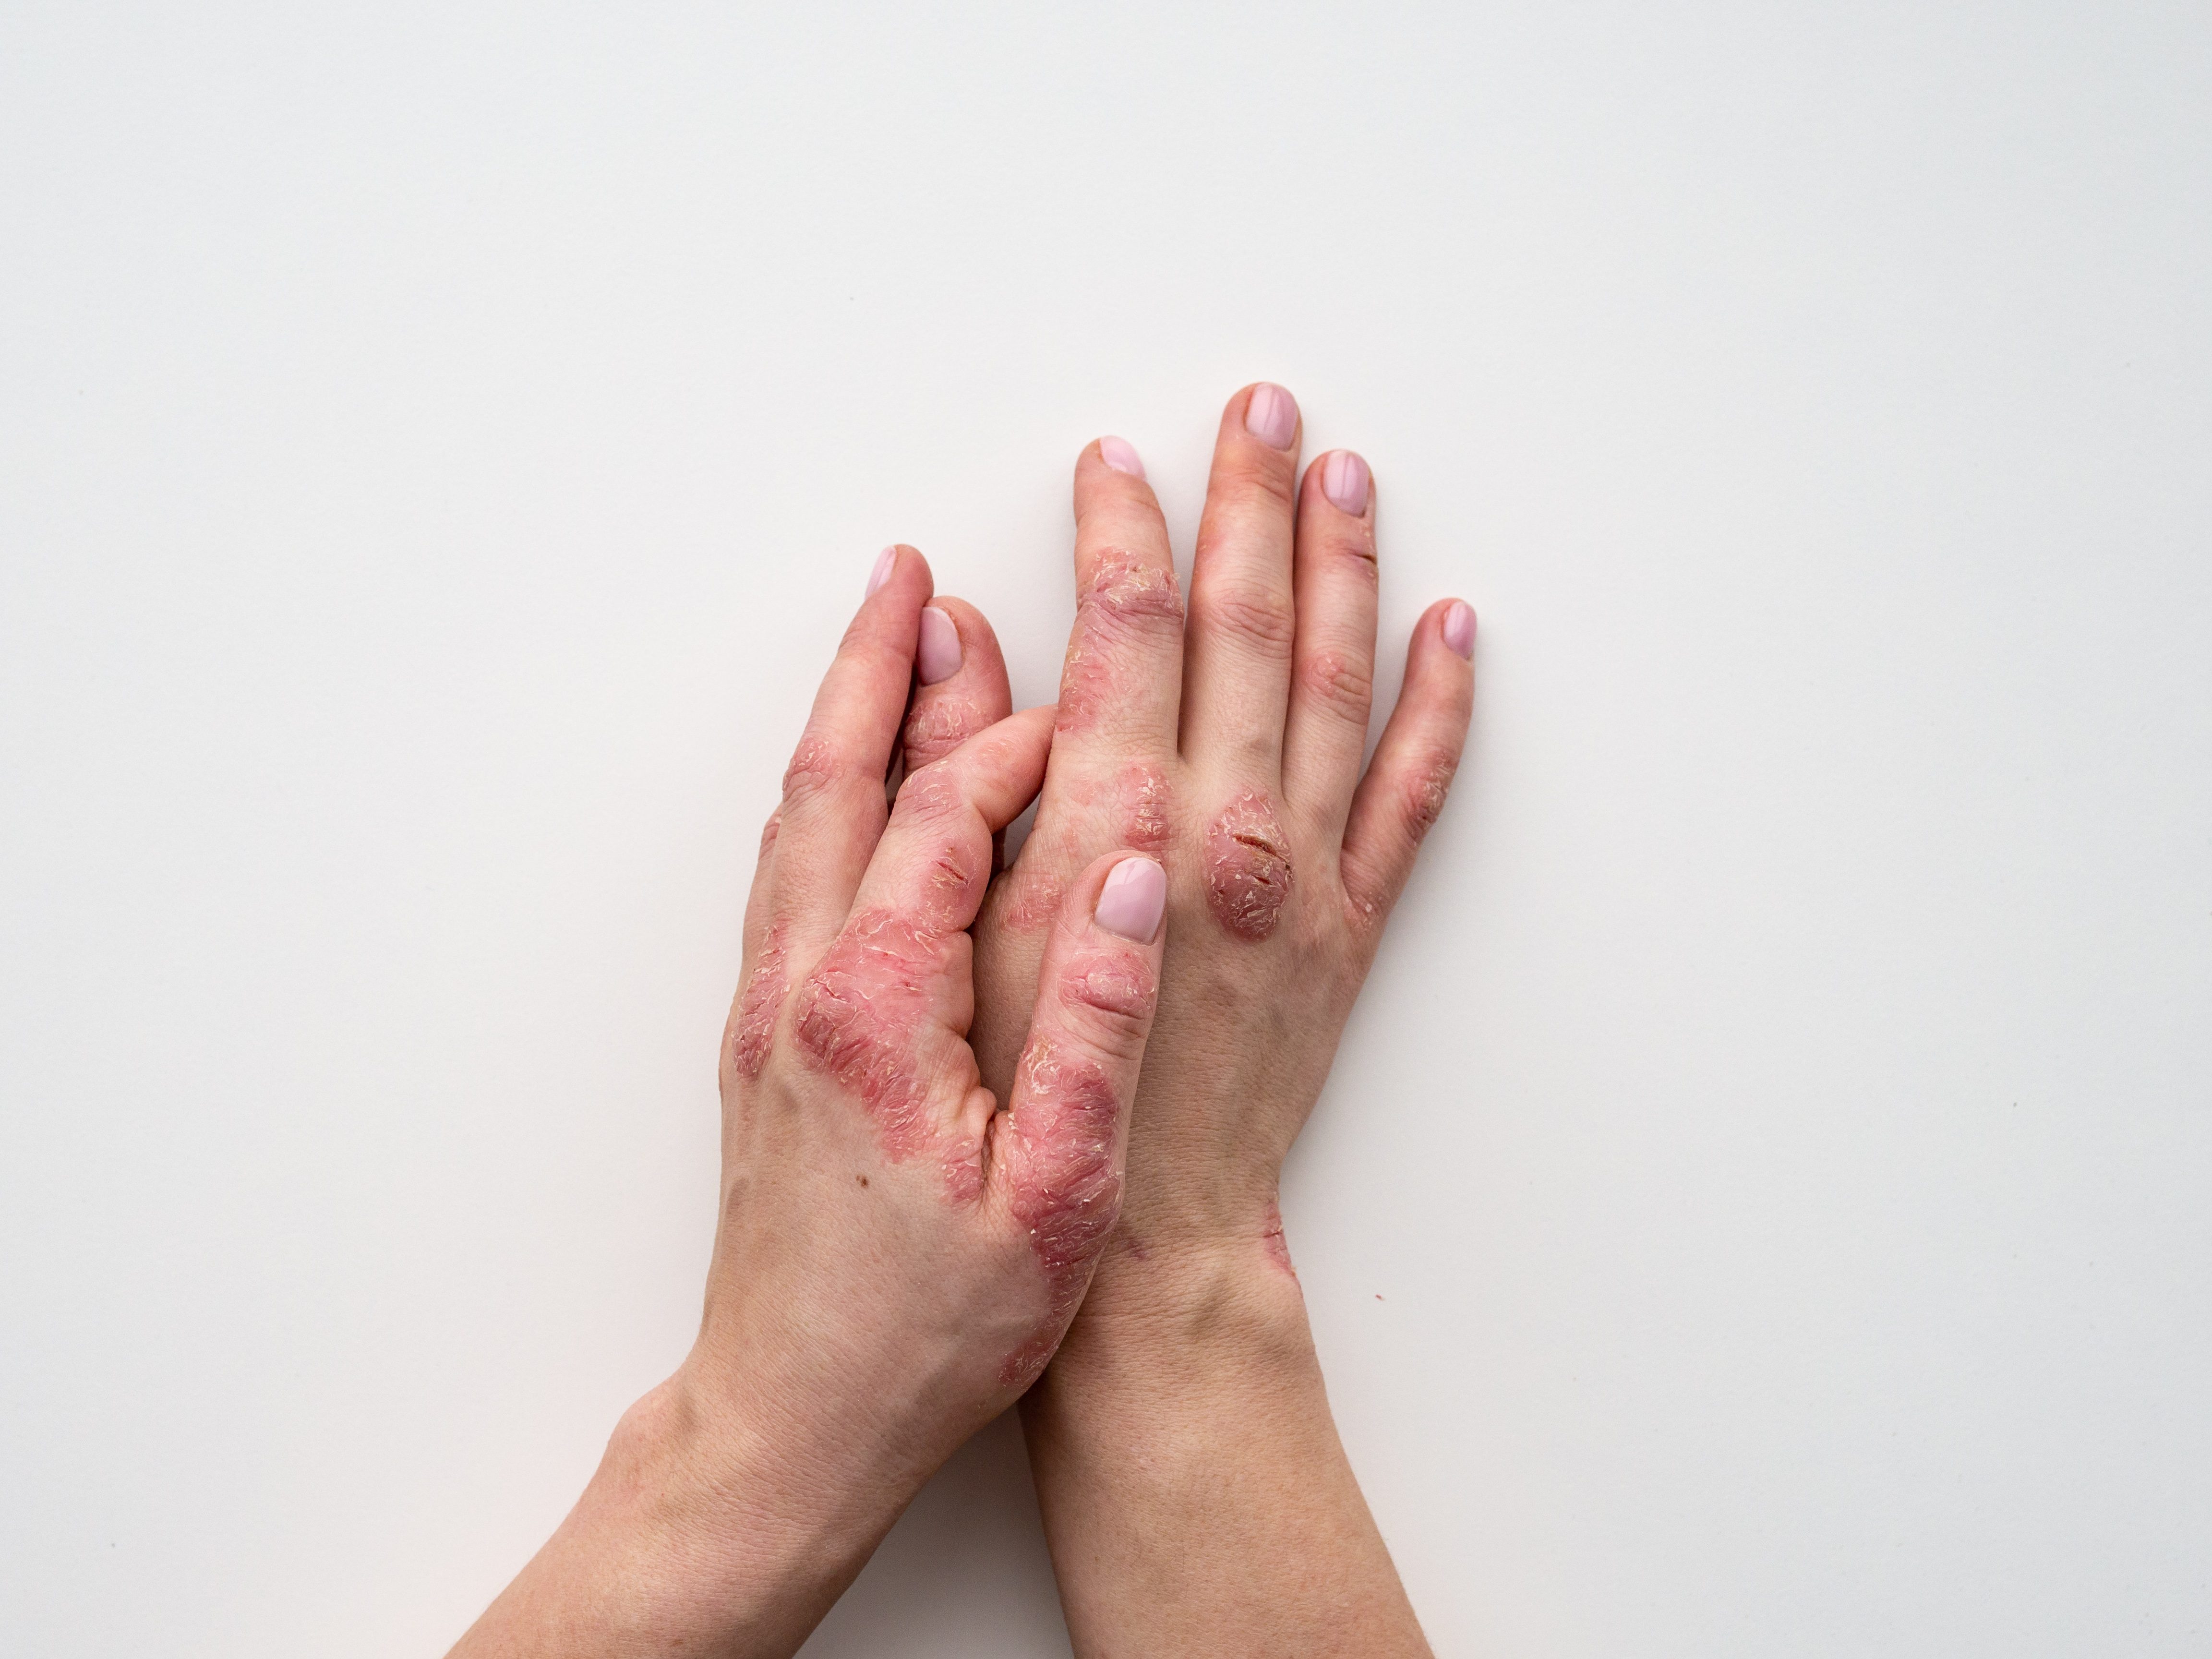 How I Treat My Psoriasis: 8 Tips and Tricks Real People Use